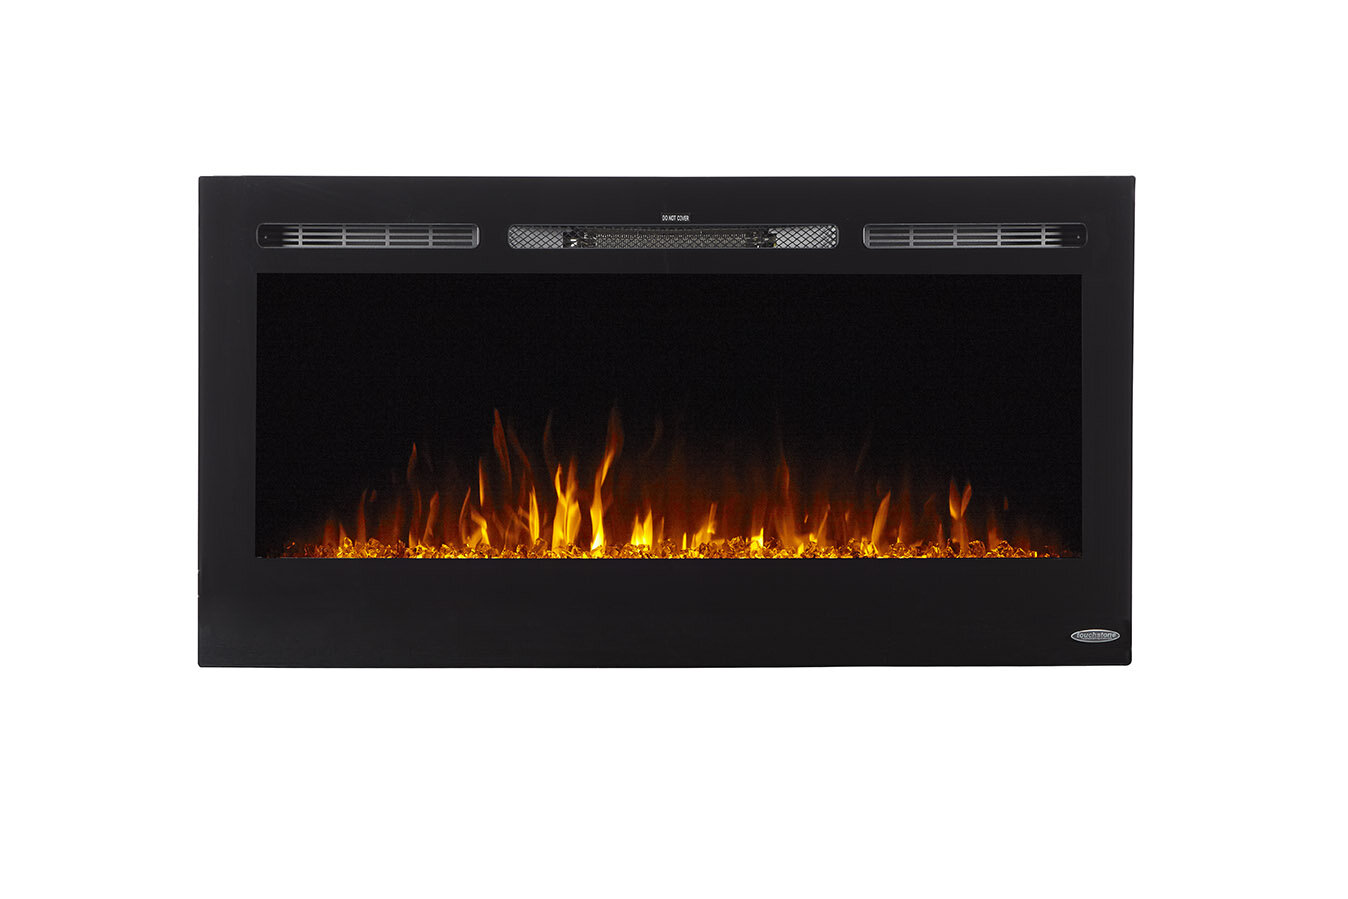 Wayfair Electric Fireplace Insert Luxury Annetta Recessed Wall Mounted Electric Fireplace